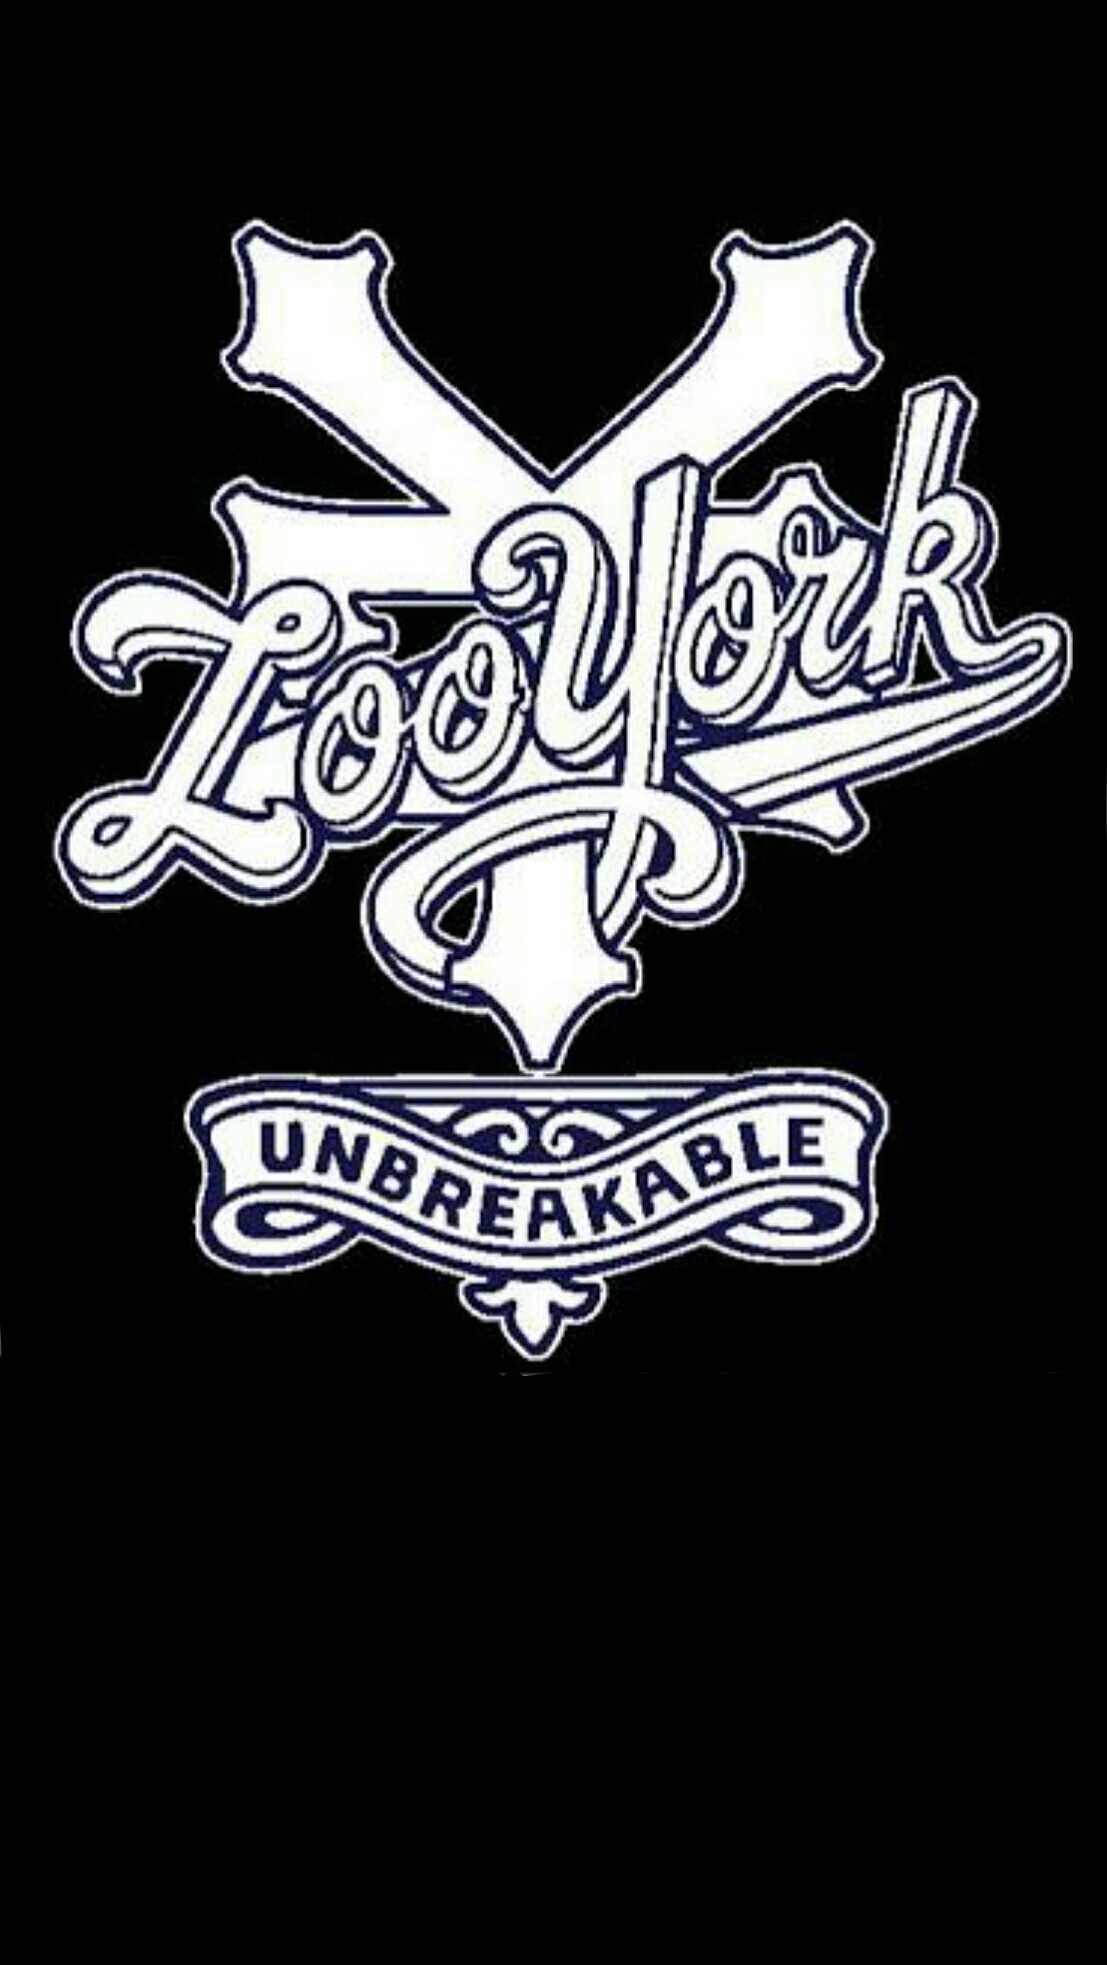 #zoo york #black #wallpaper #android #iphone